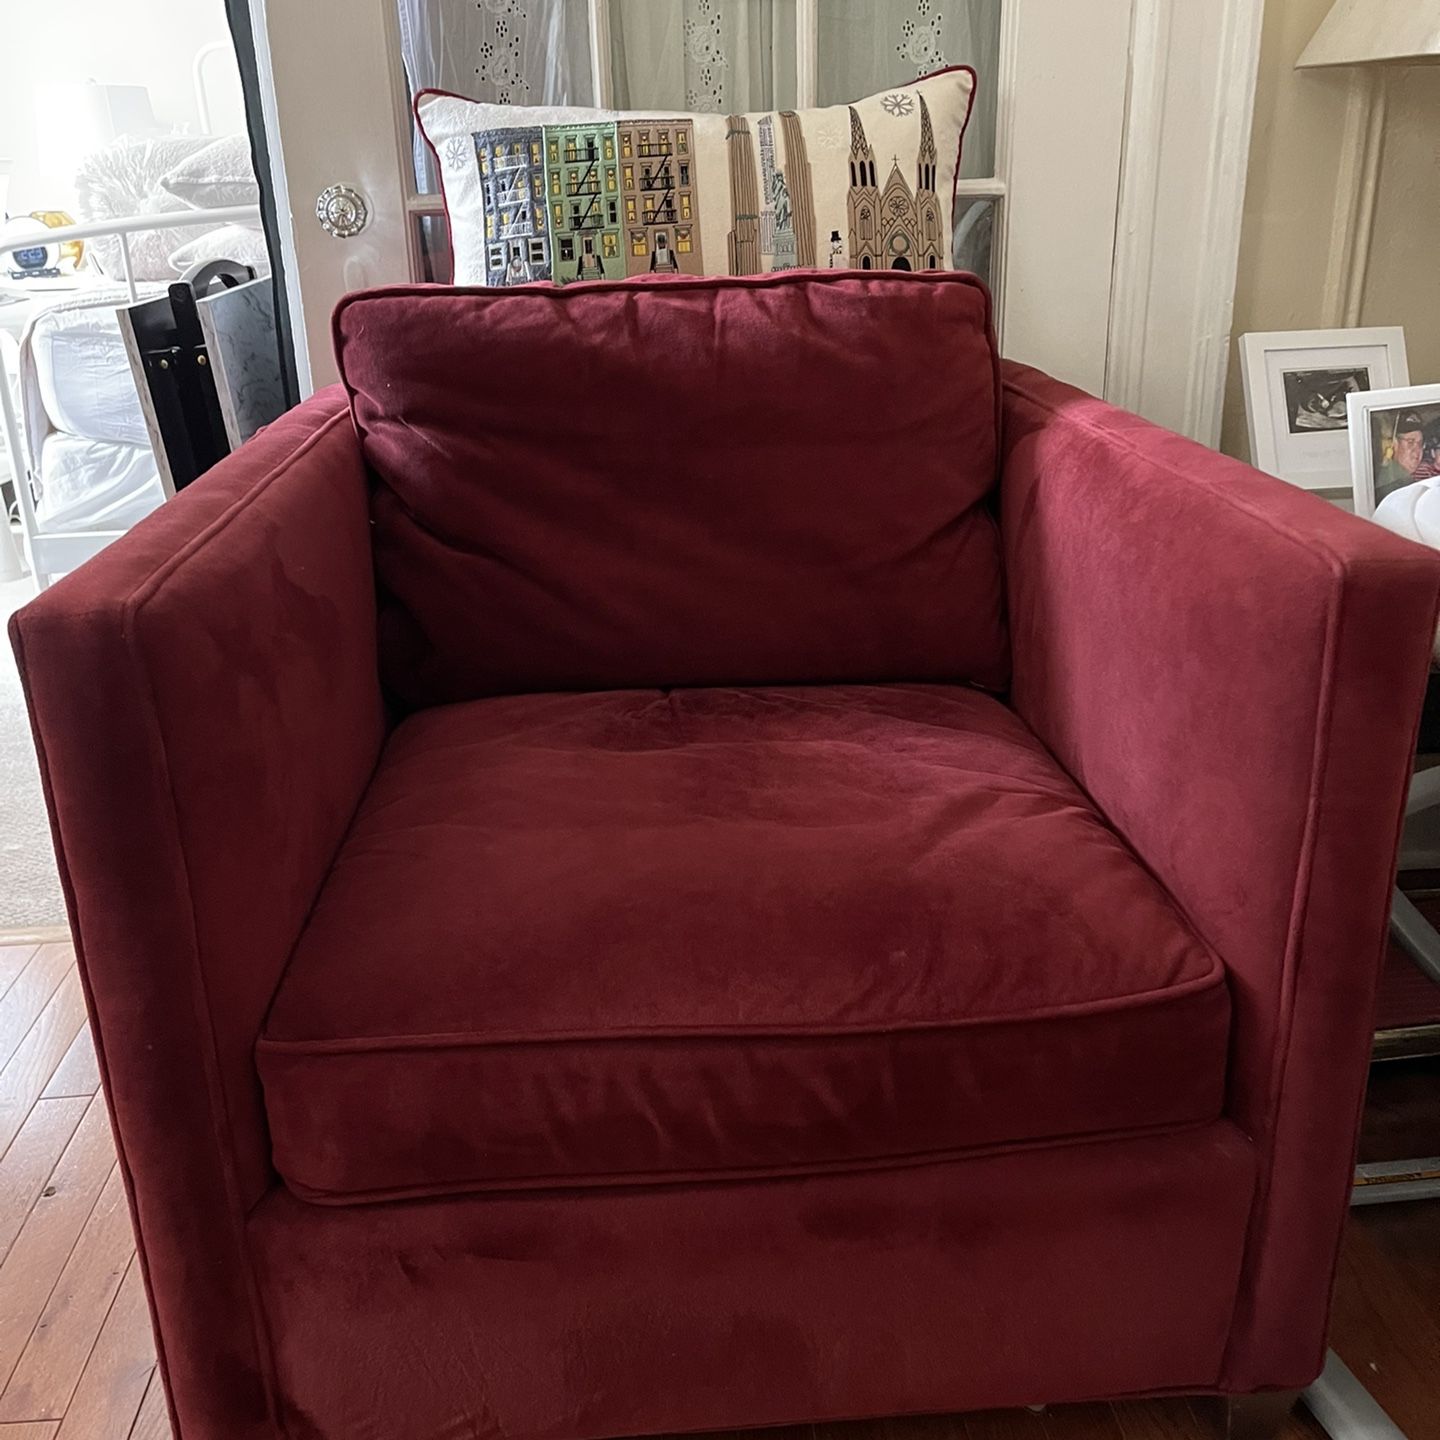 2 red Crate & Barrel chairs